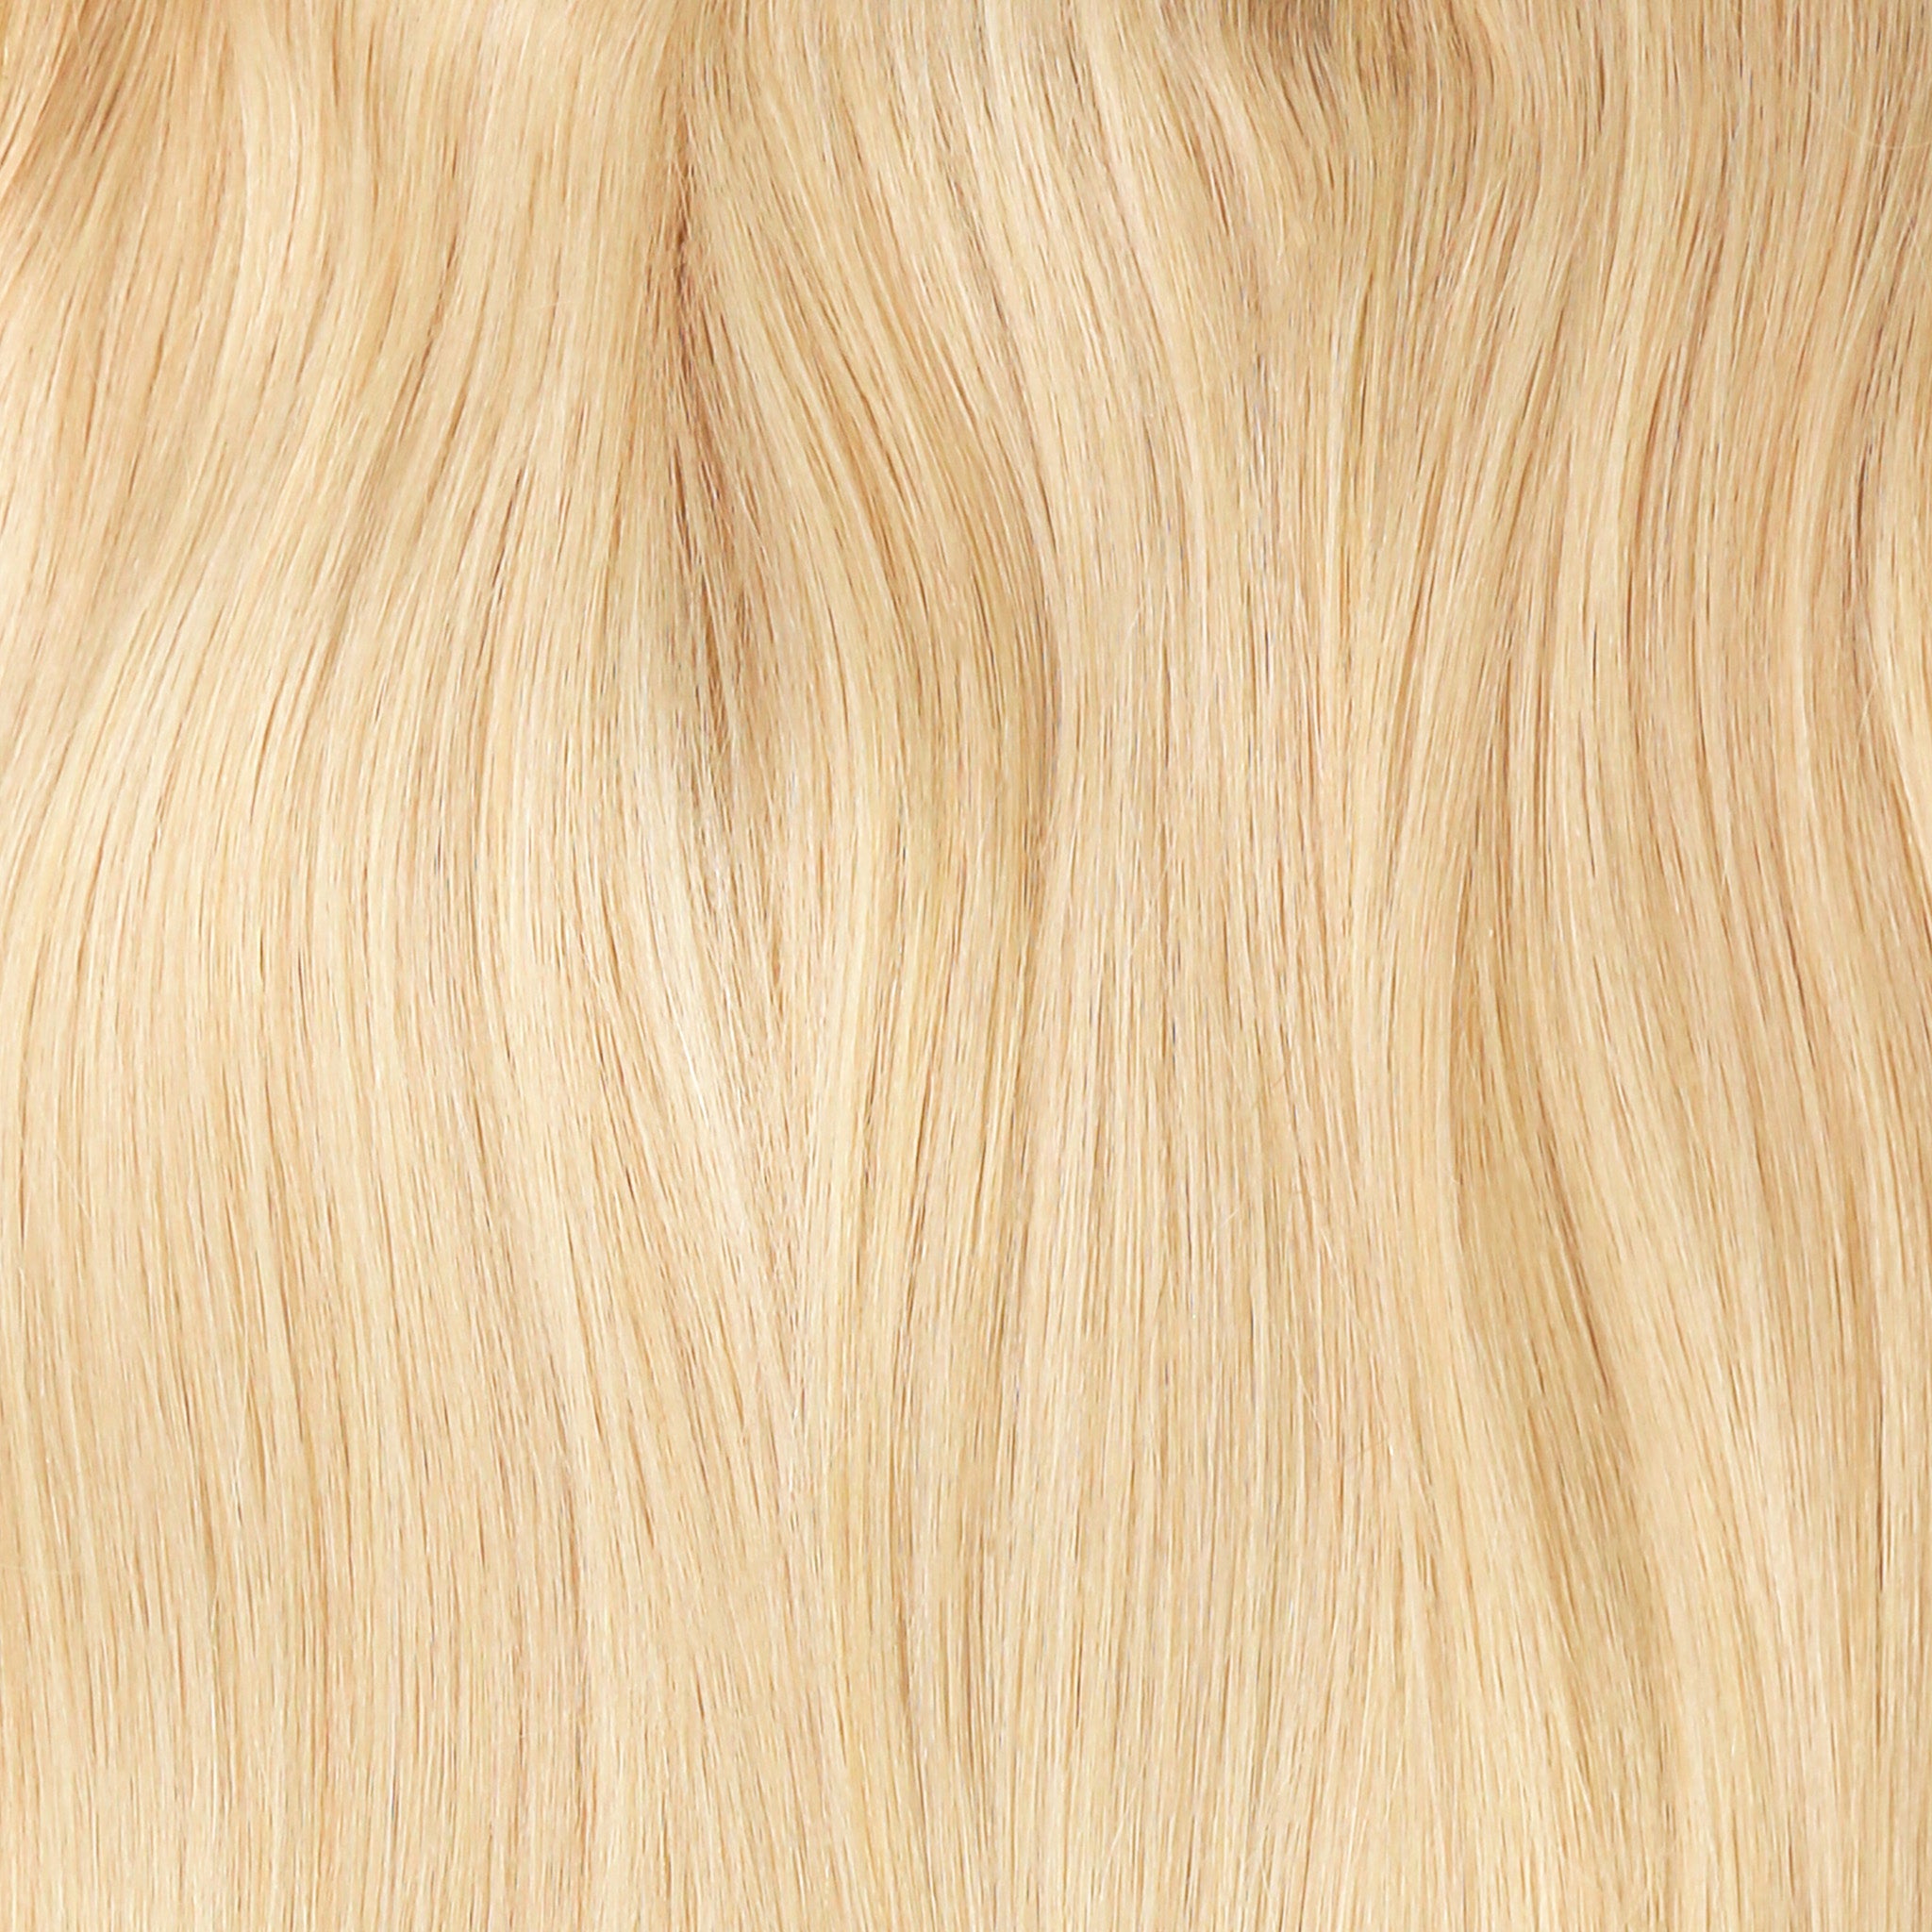 #24 Ultra Narrow Clip In Hair Extensions